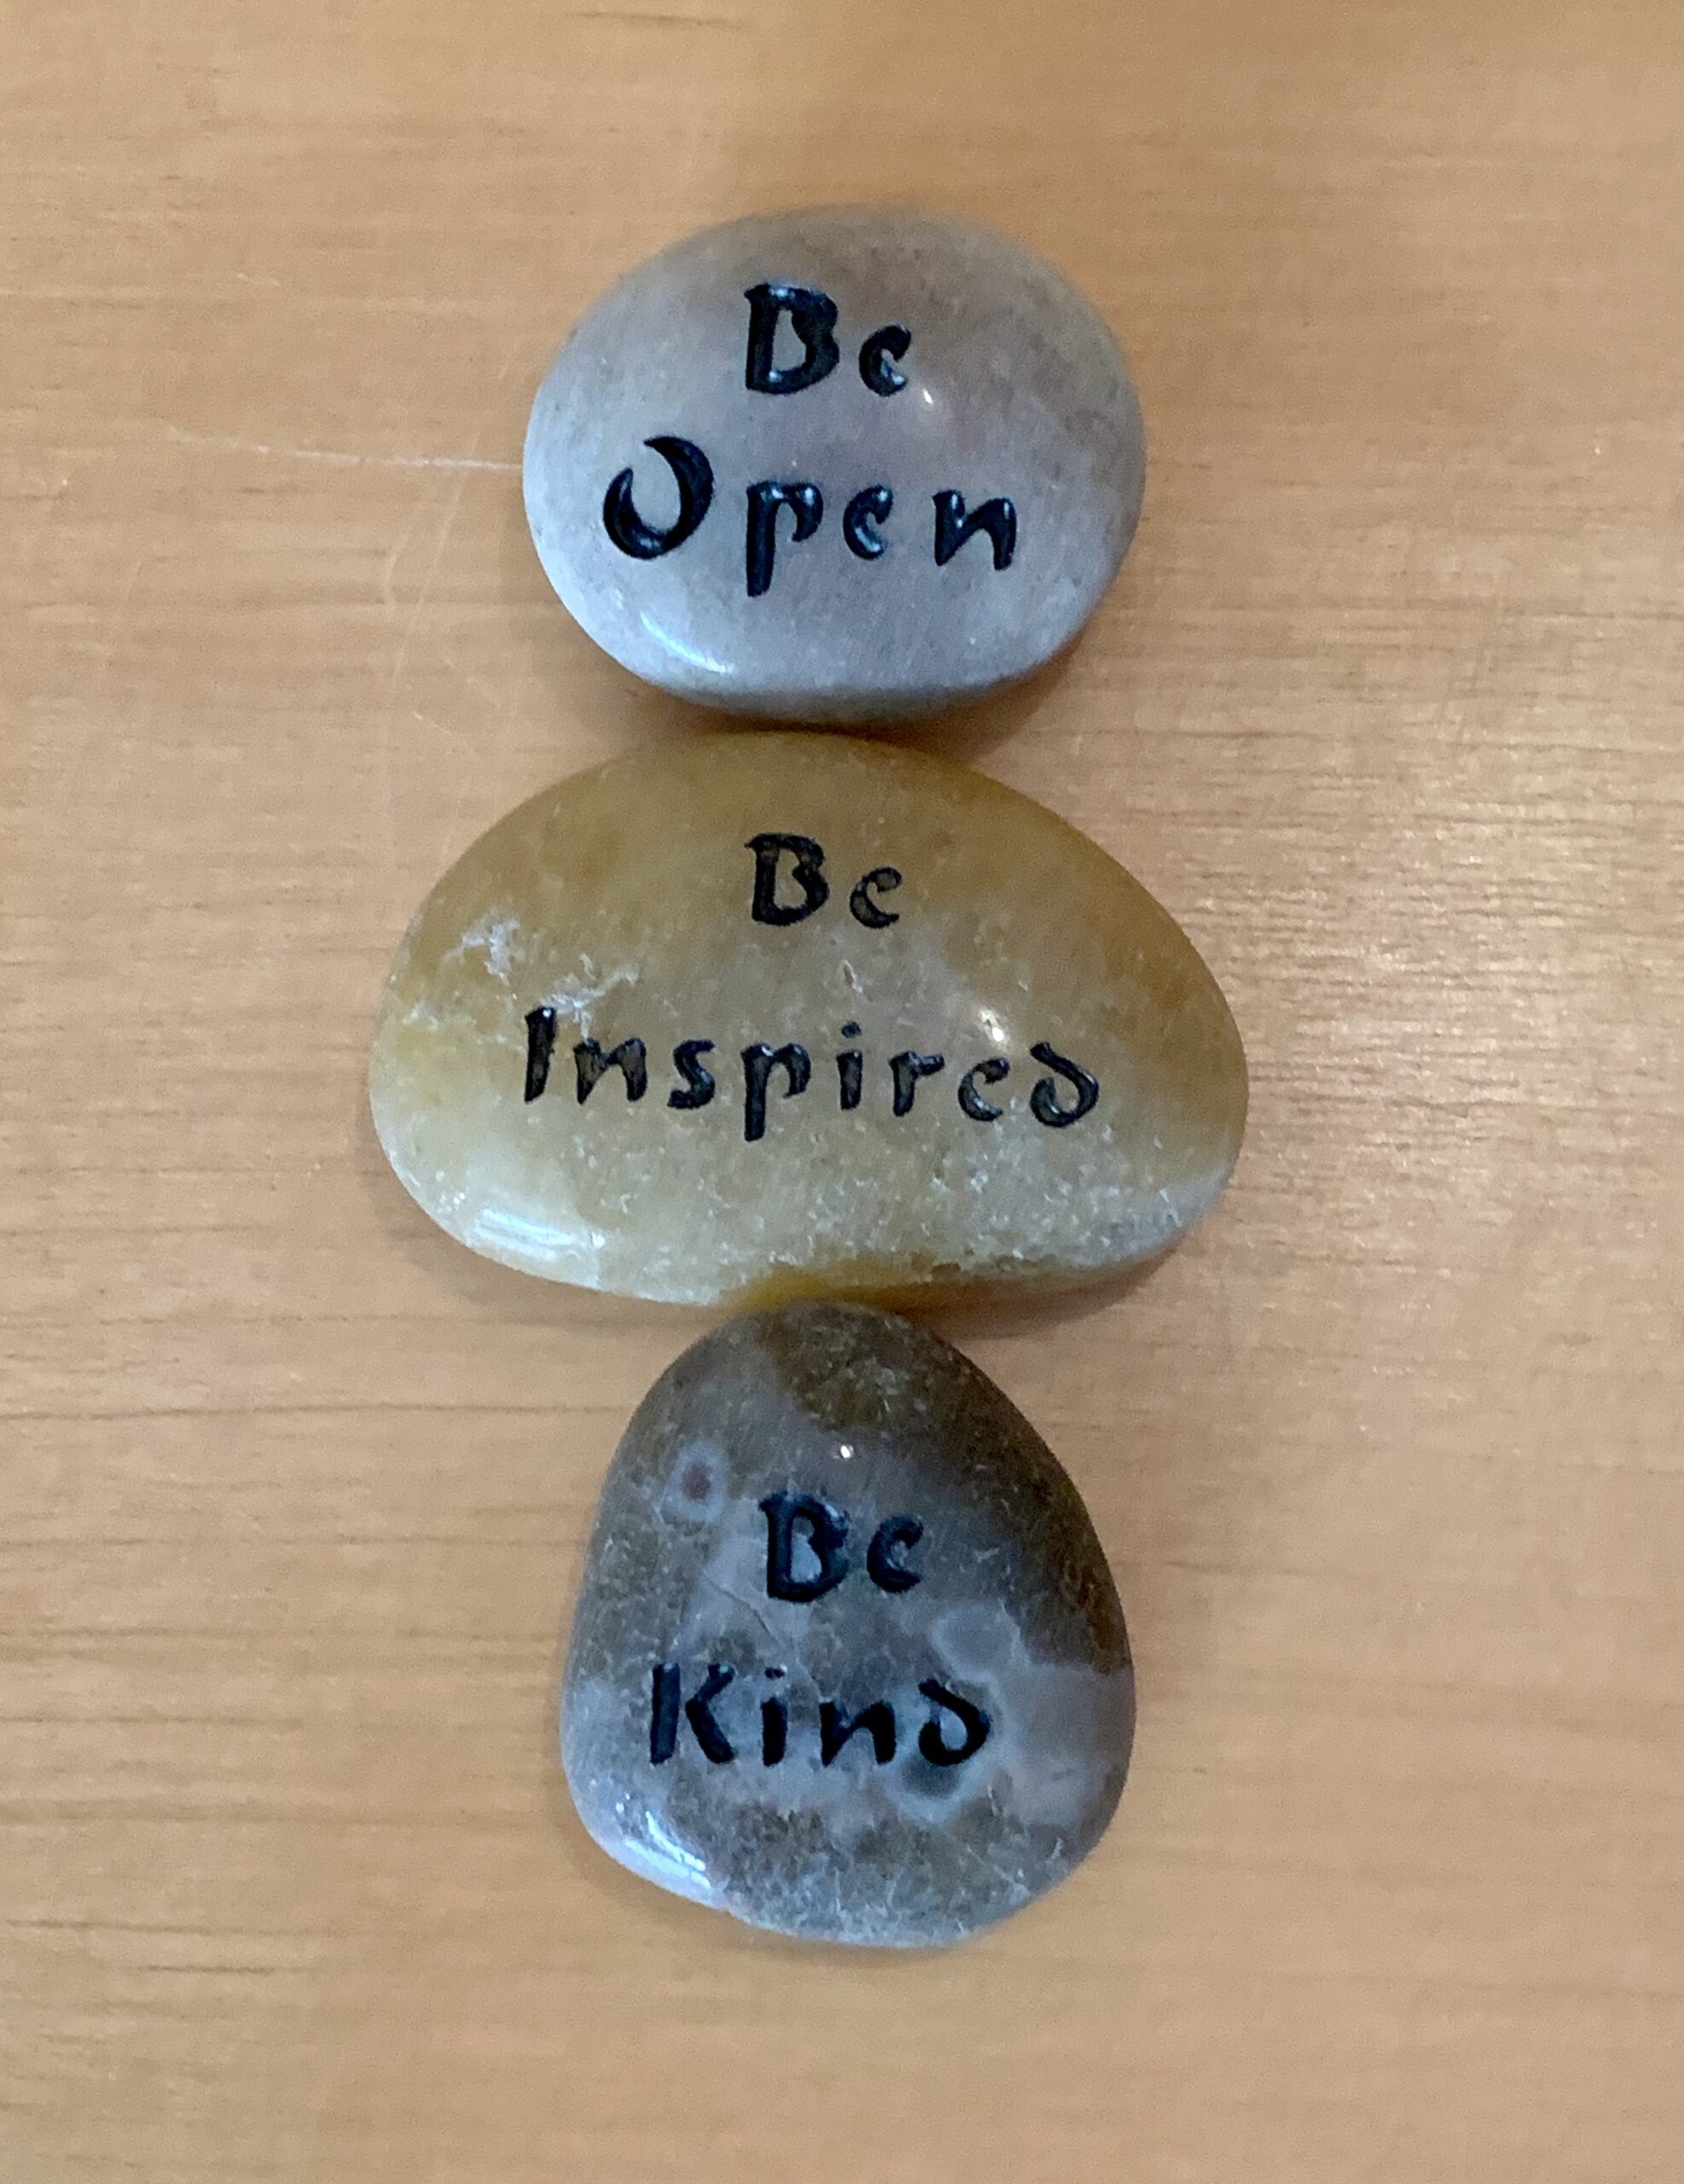 Be Open, Be Inspired, Be Kind Haiku Mantra Stone set gift package